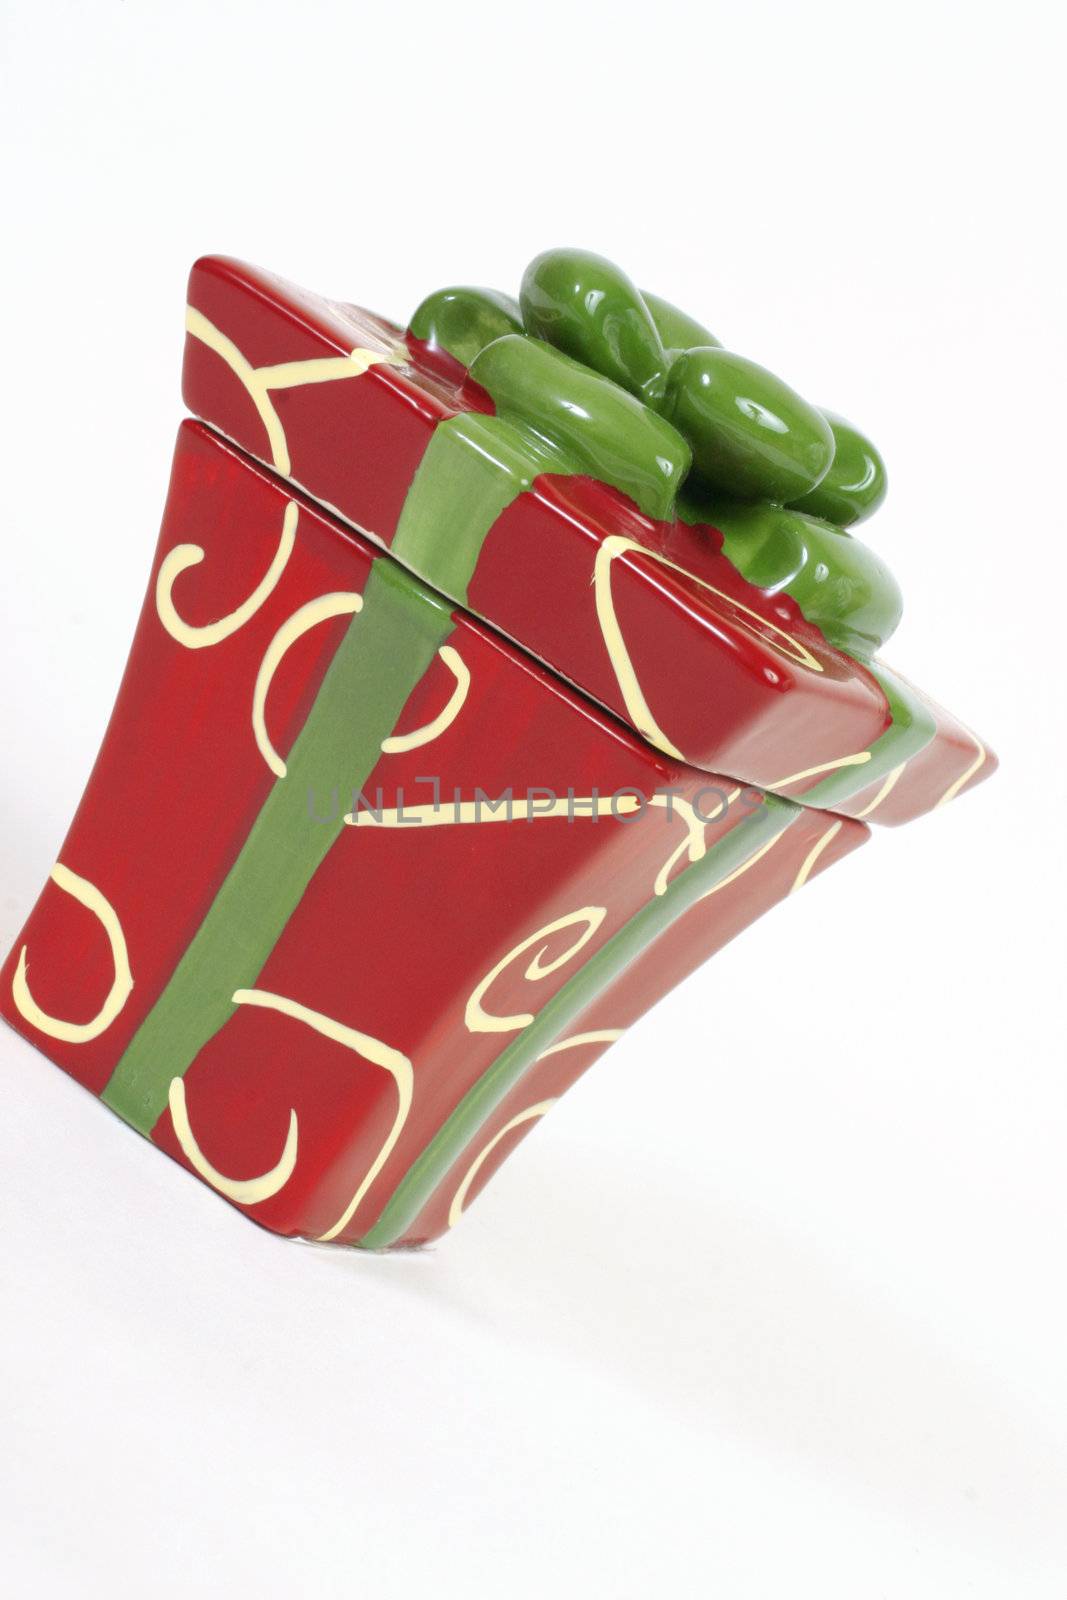 Giftbox red and green by lovleah